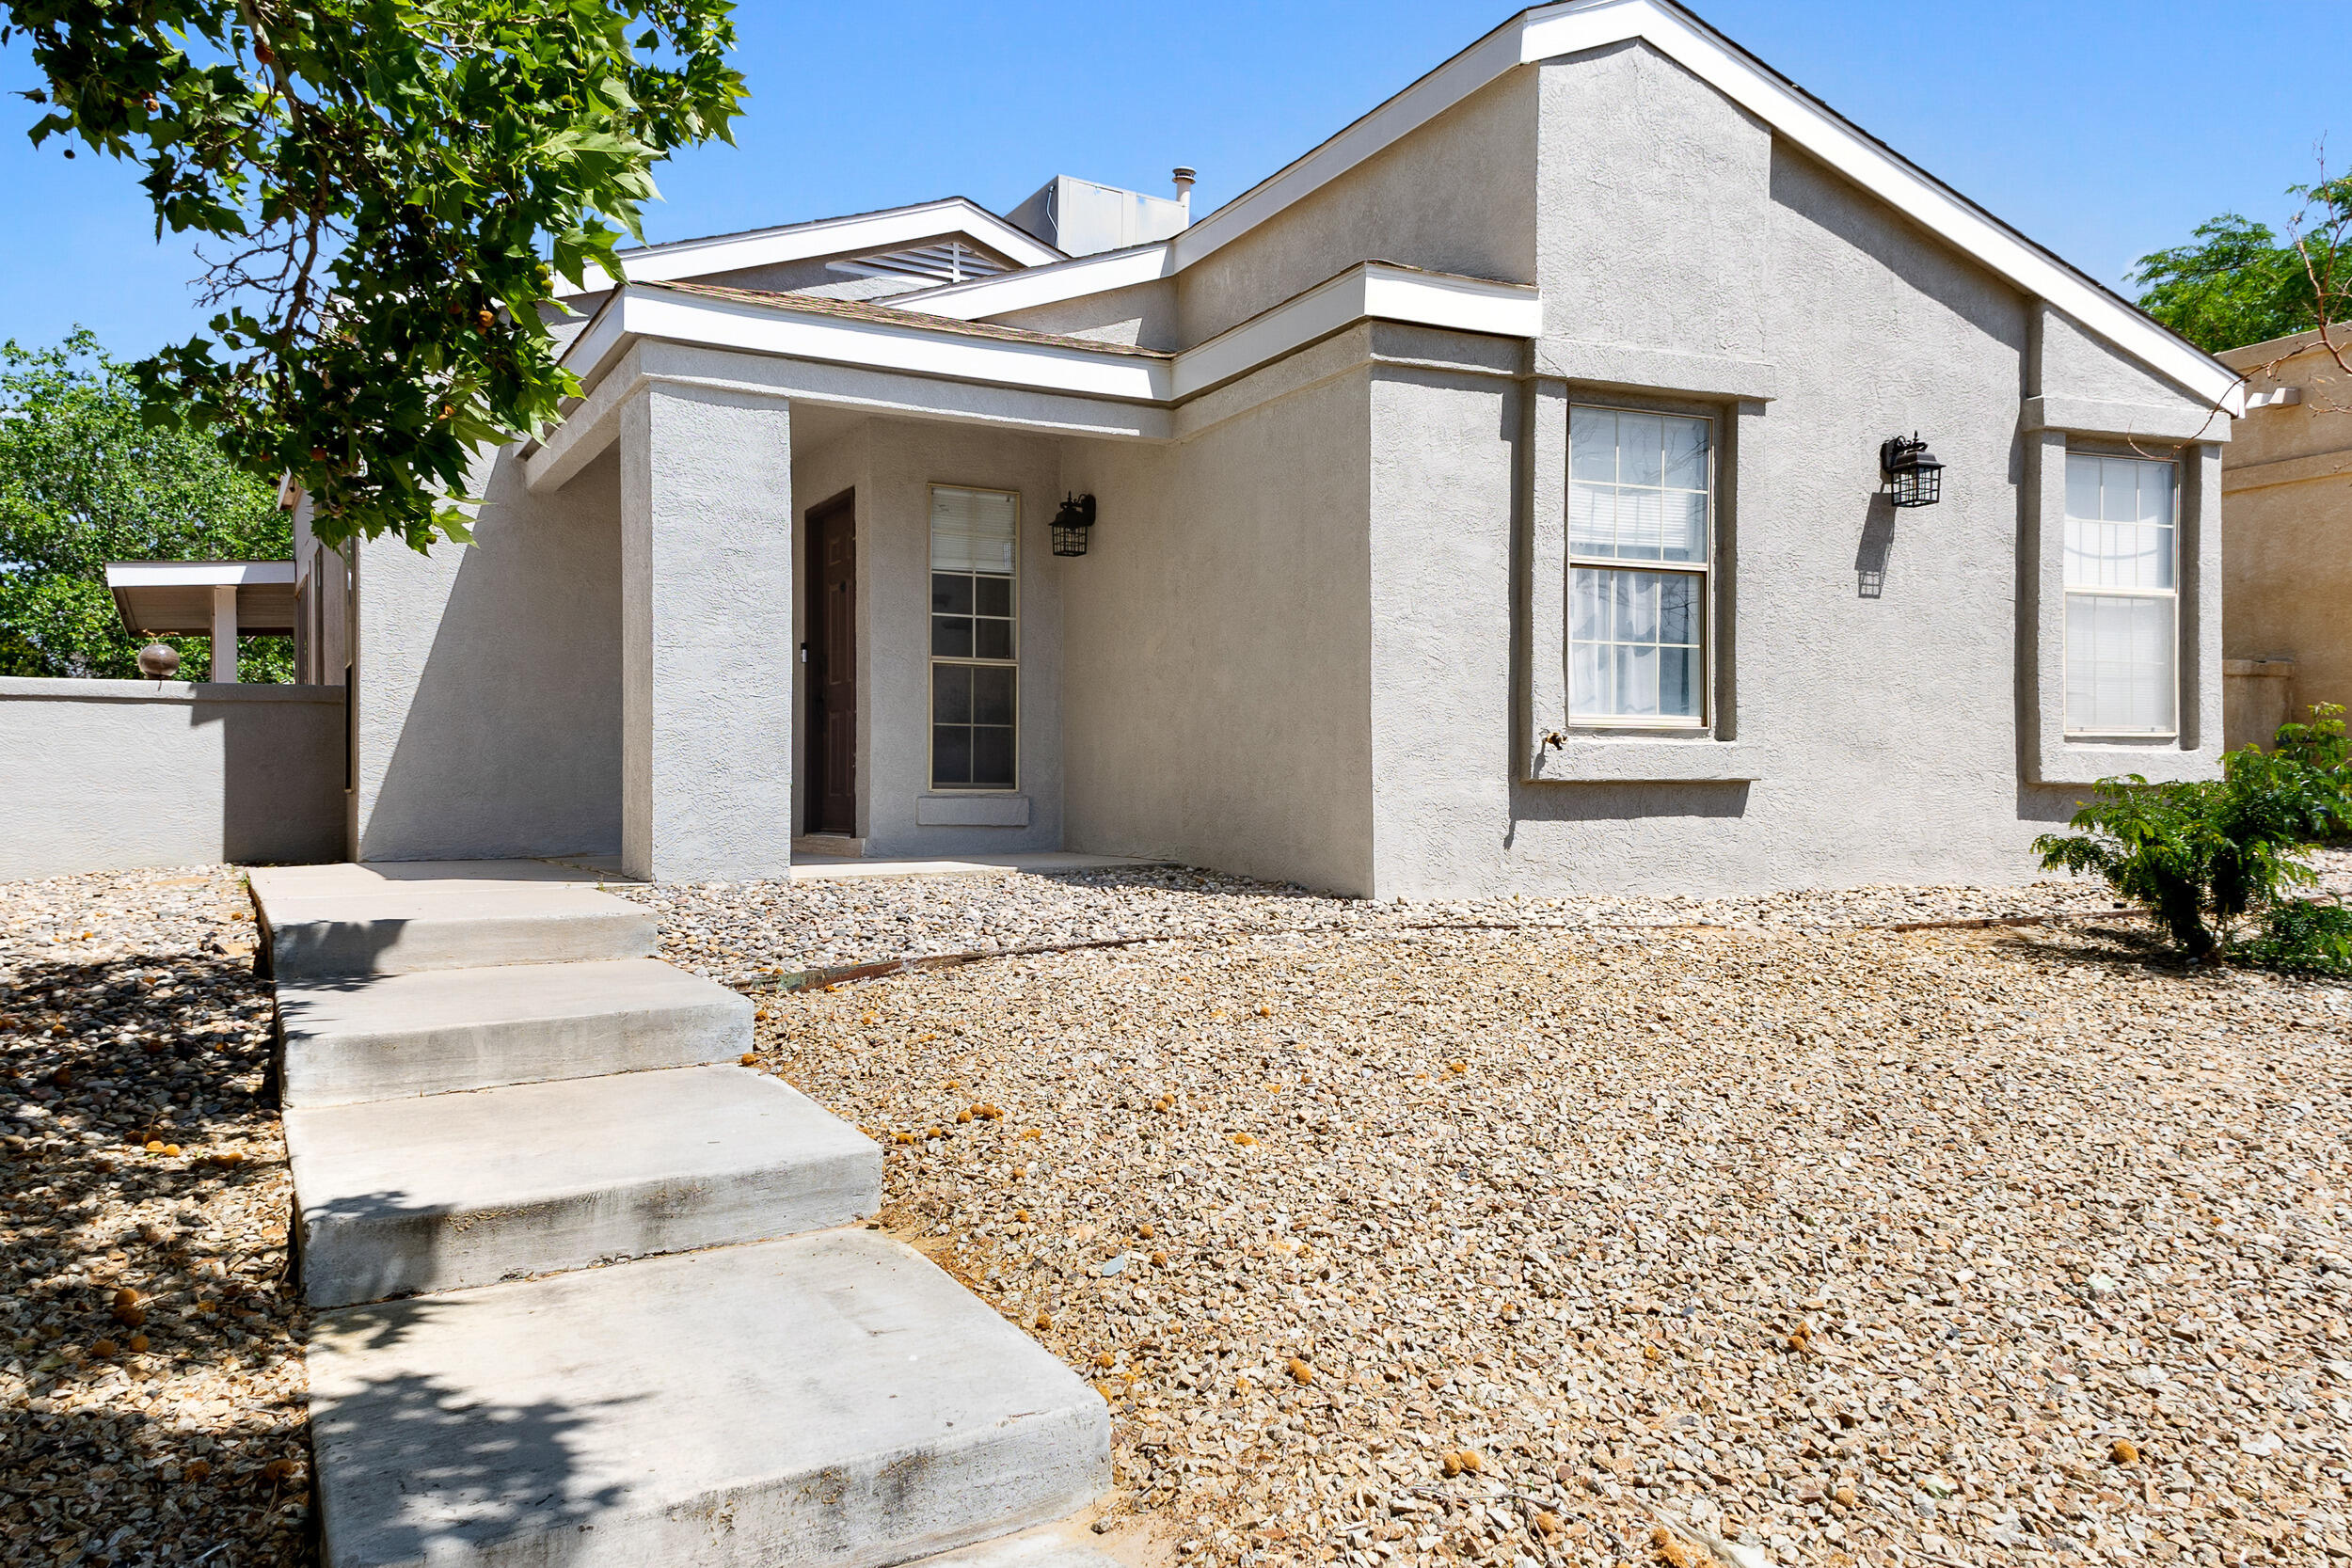 Welcome to this charming home in the heart of Rio Rancho! This beautiful 2 bedroom, 2 bath residence offers an inviting blend of comfort and modern style. Enjoy the airy, open feel of vaulted ceilings that enhance the spaciousness of the living room, making it an ideal space for relaxation and entertaining. Both bathrooms have been tastefully updated with tile up to the ceiling, providing a touch of luxury to your daily routine. The home's exterior has been freshly painted, offering great curb appeal and ensuring low maintenance for years to come. The attached 2-car garage includes a dedicated workshop area, perfect for DIY projects, hobbies, or extra storage. Come visit today!